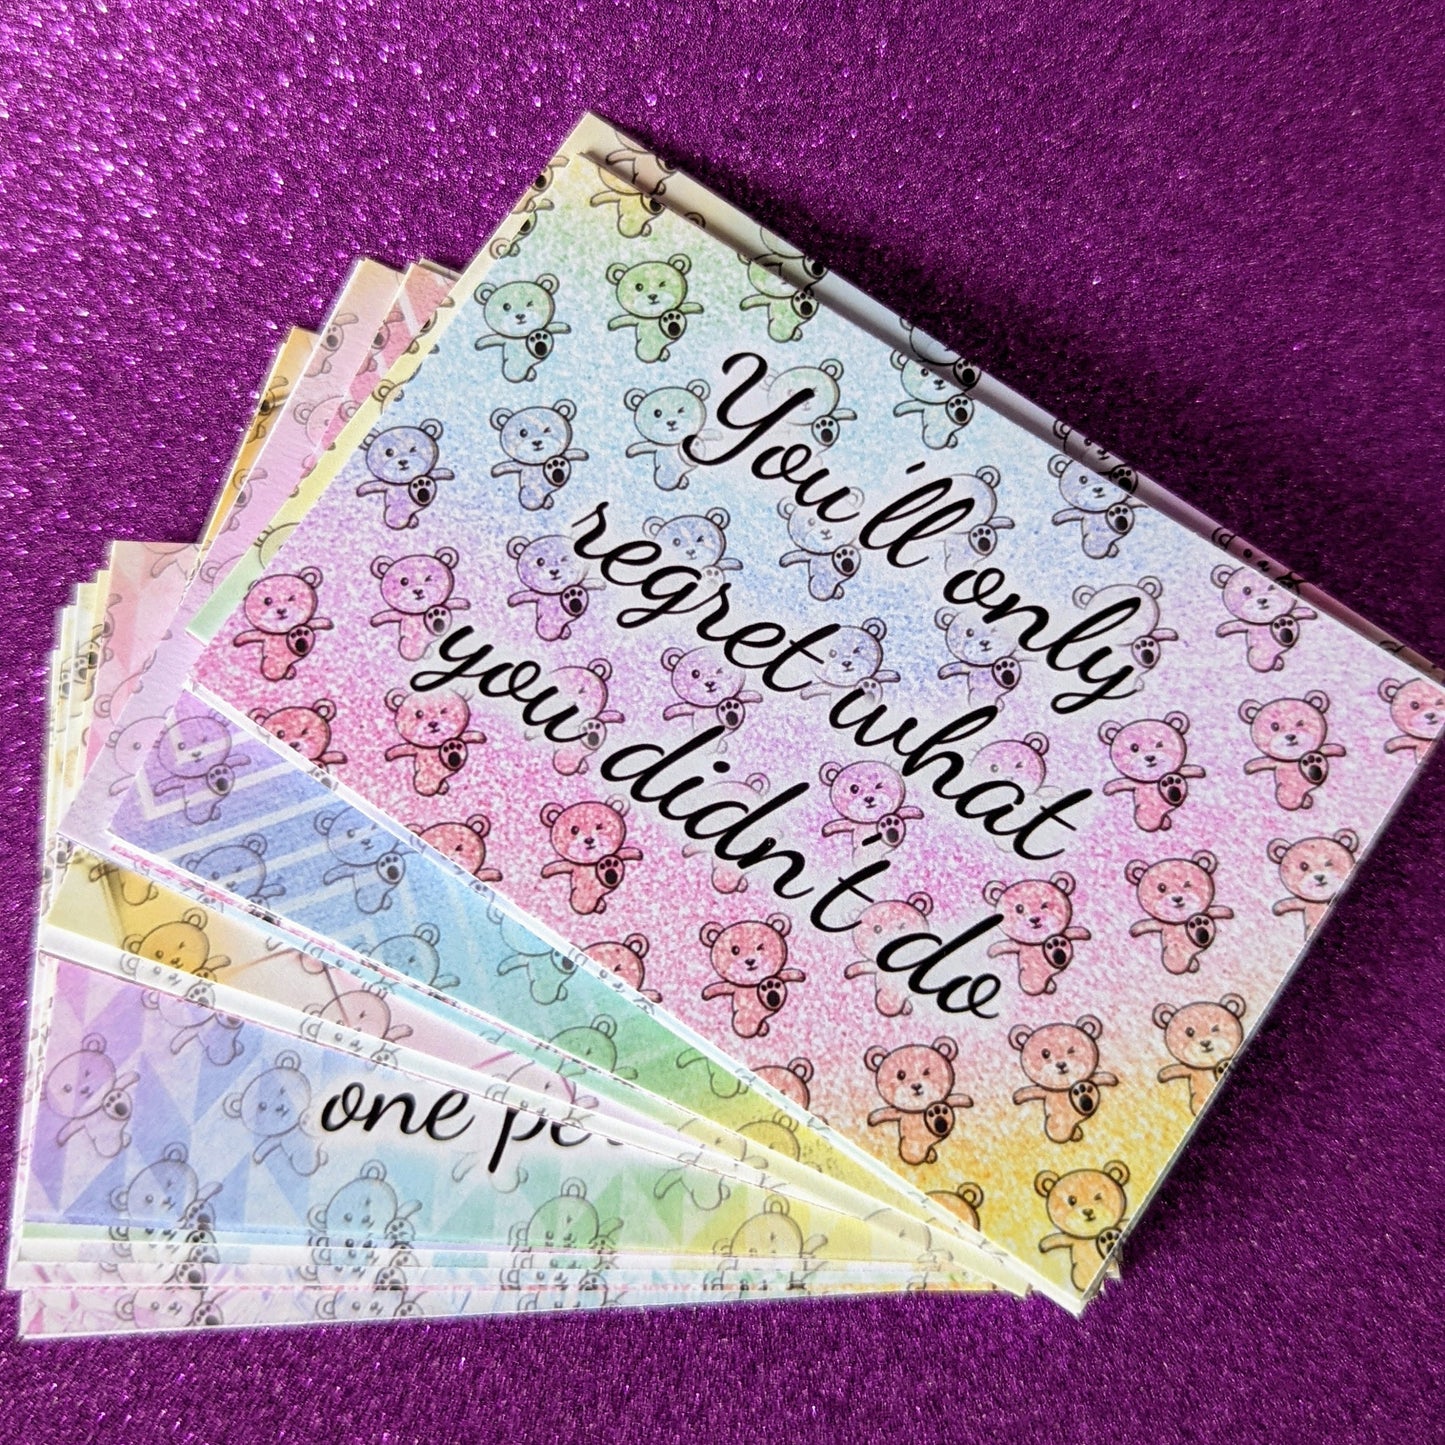 The Sweary Affirmation Shop - Buttkicking Affirmations Deck | Sweary Encouragement Cards | Custom Rainbow Card Set | Personalised Affirmation Gift Box